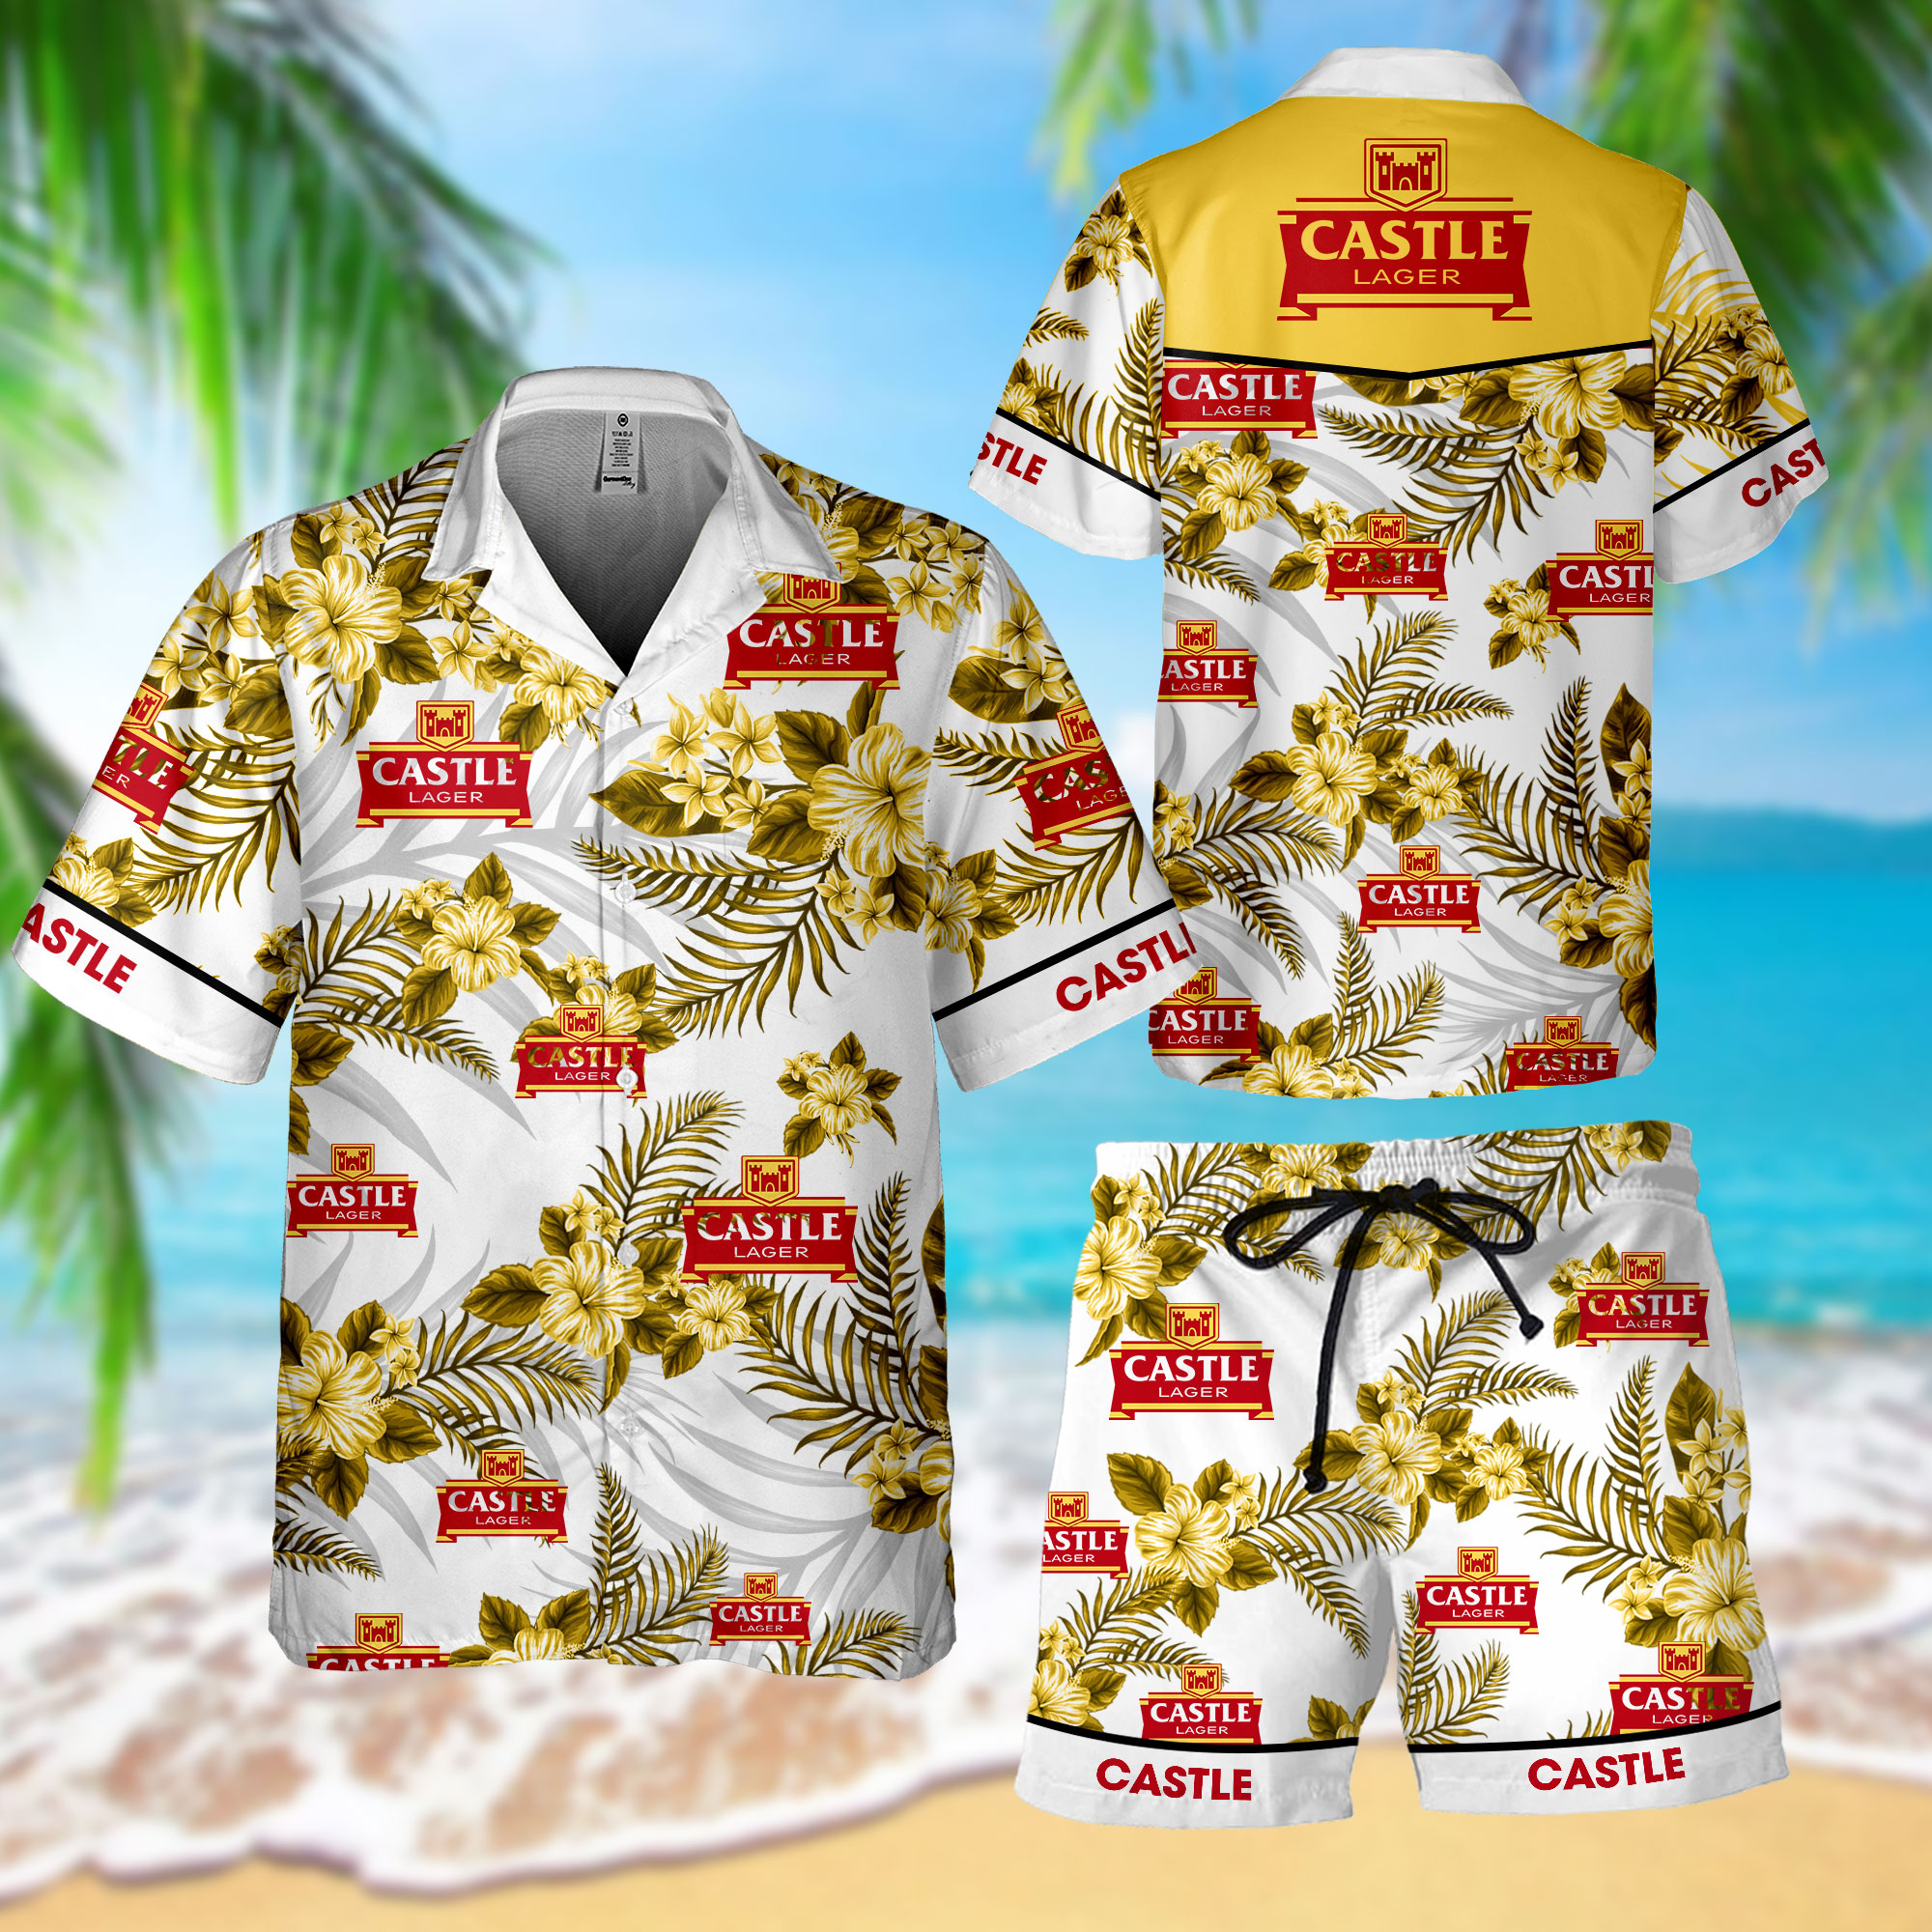 NEW Castle Lager Hawaii Shirt, Shorts